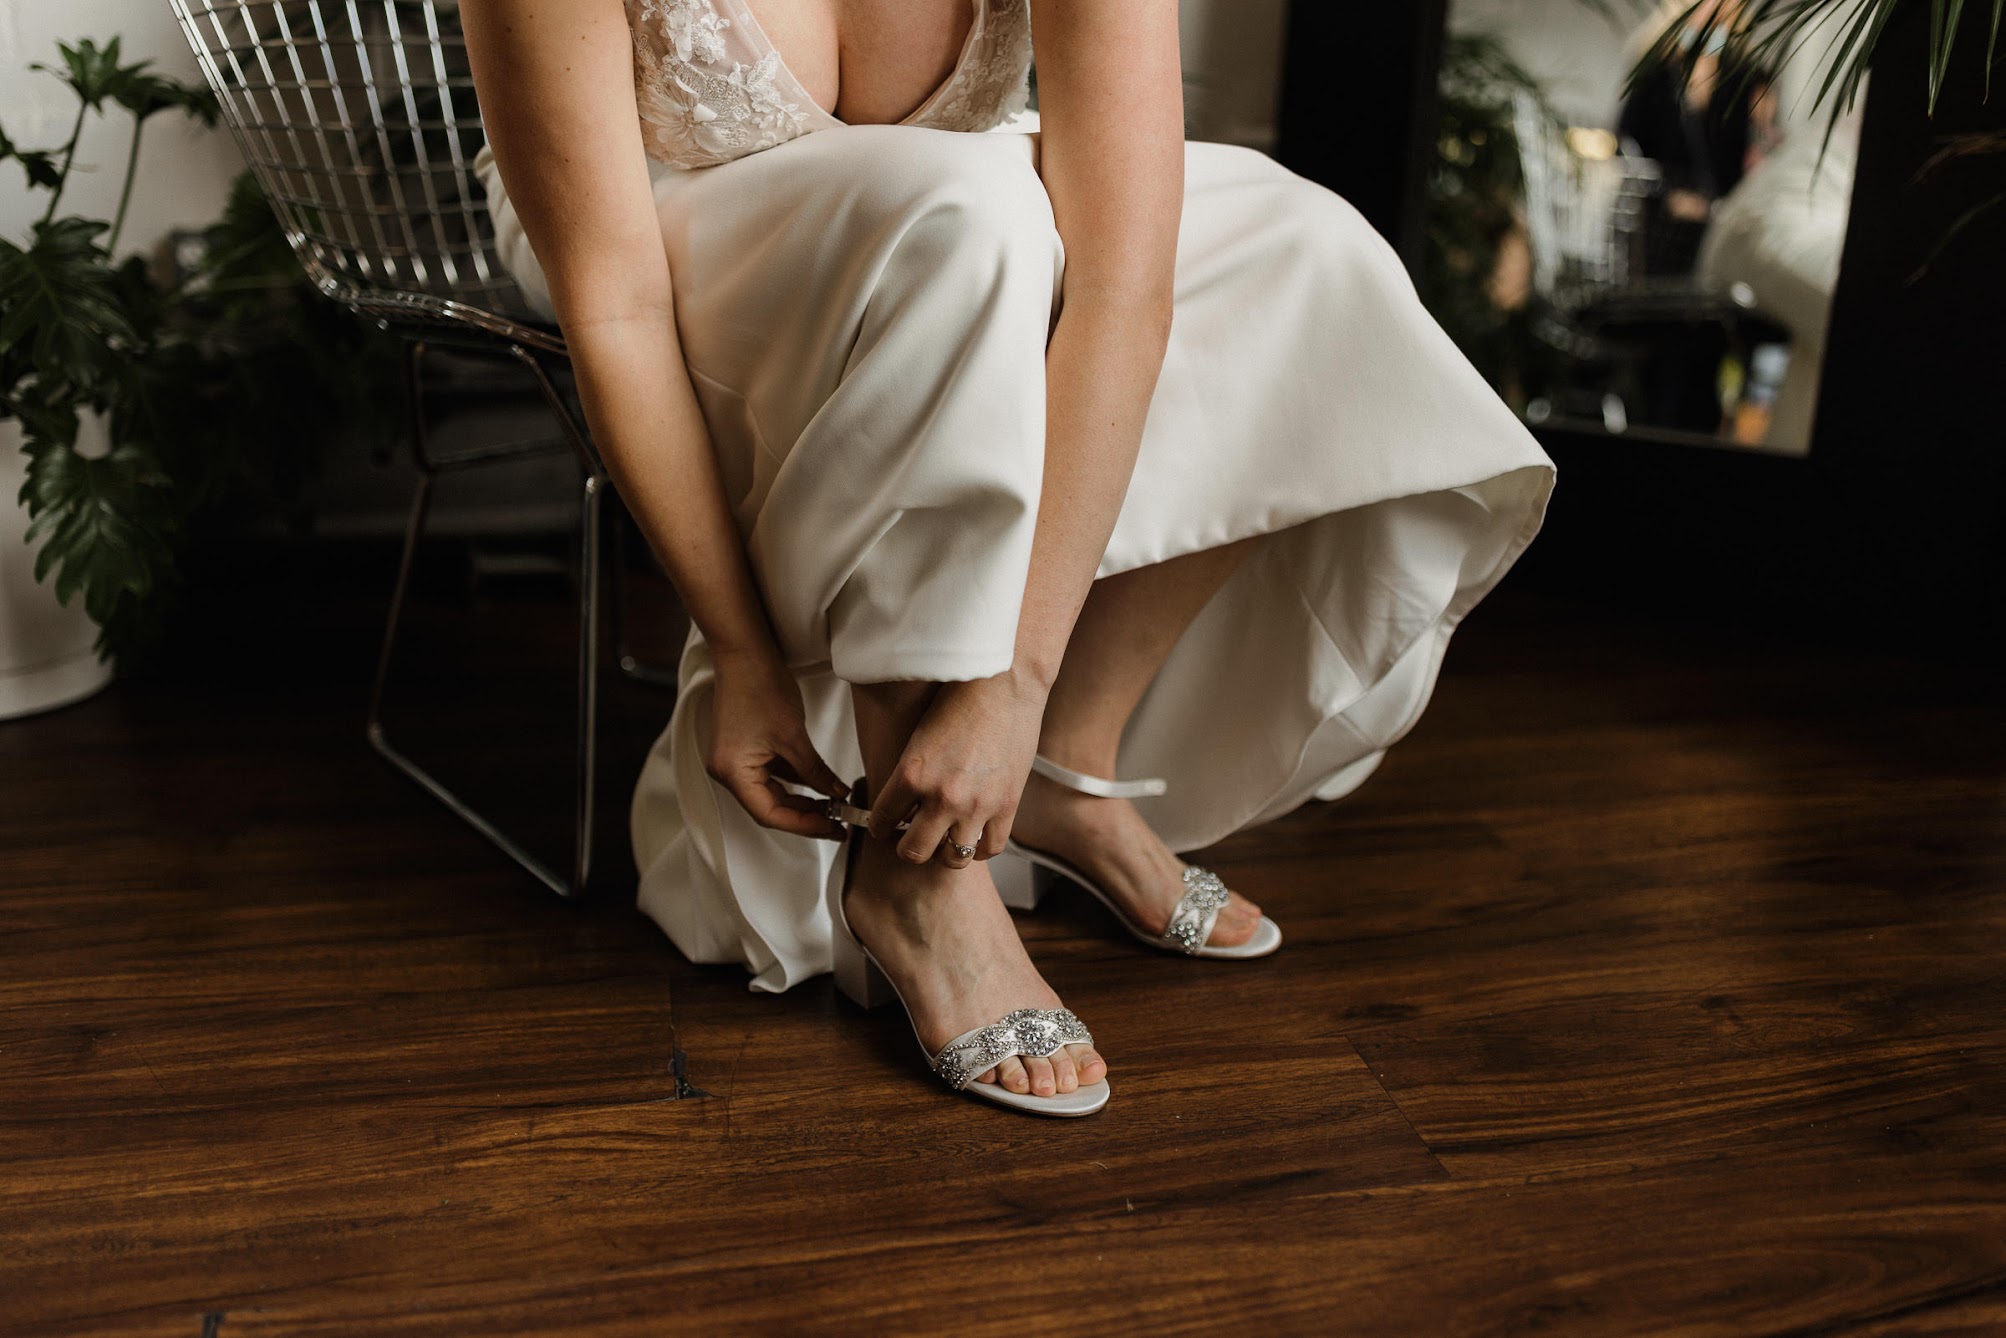 women putting on her wedding shoes 